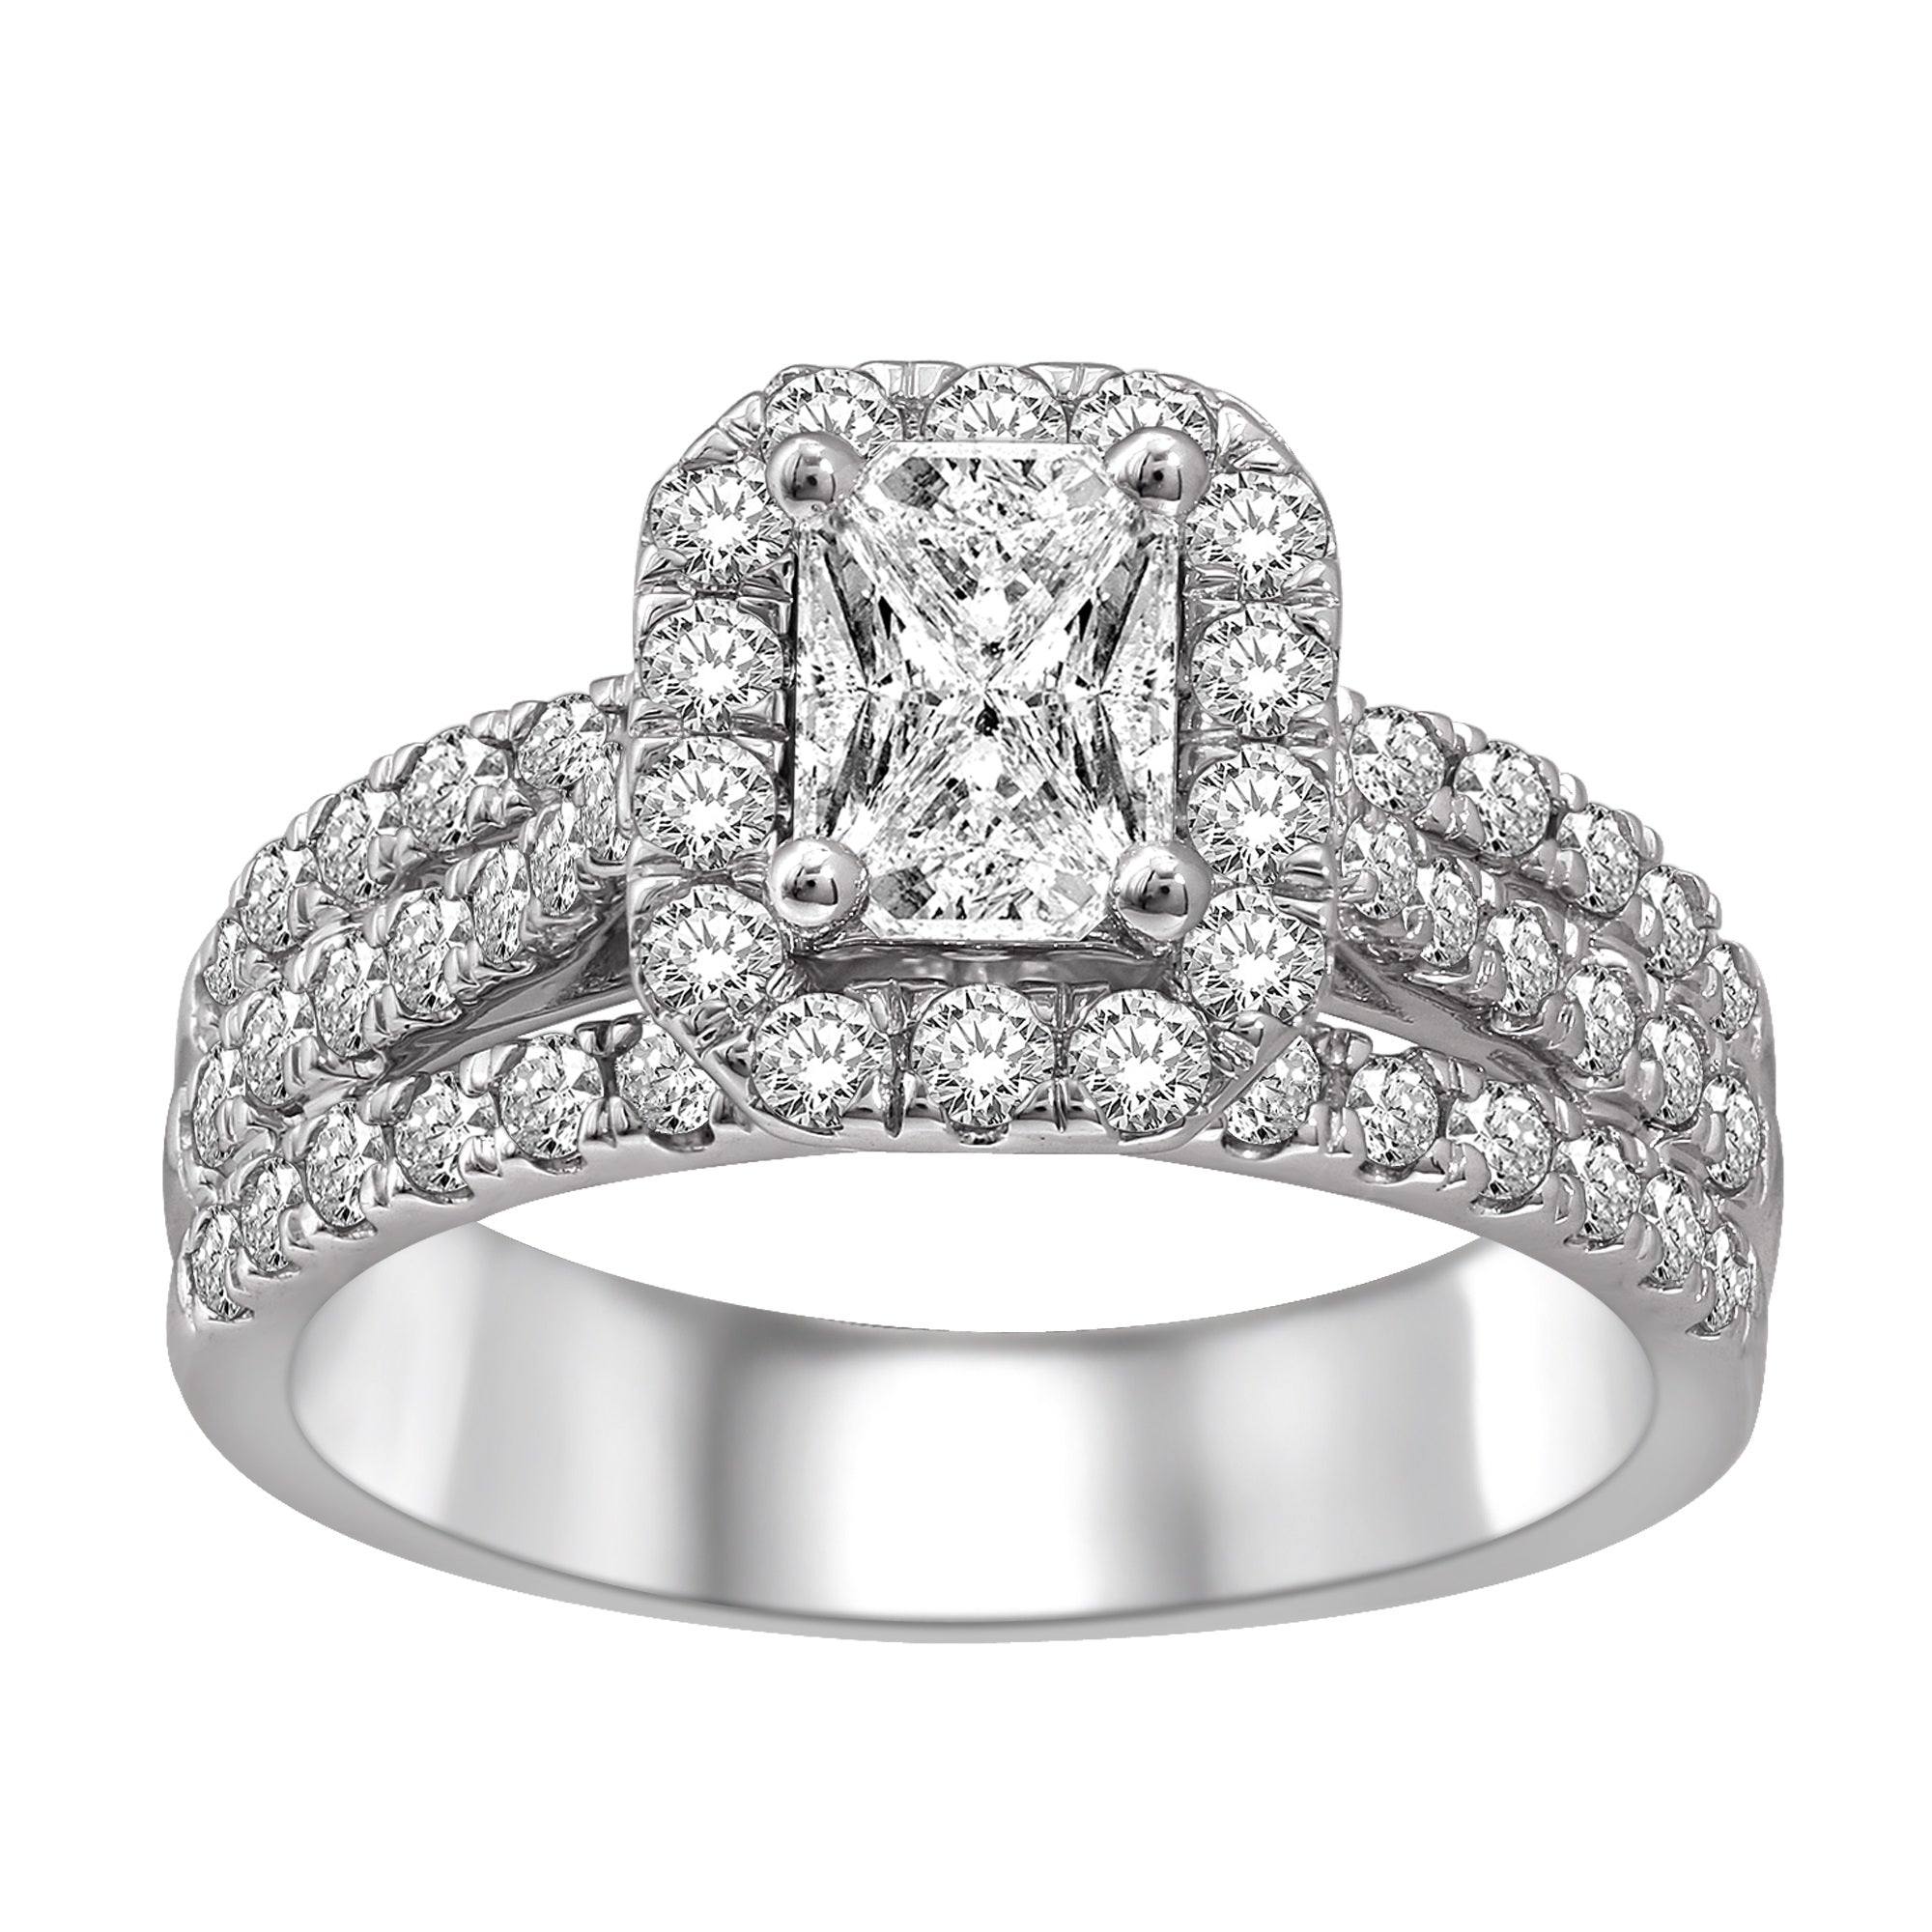 Lovecuts 14K White Gold 1 1/2 Ct.Tw.Diamond Engagement Ring